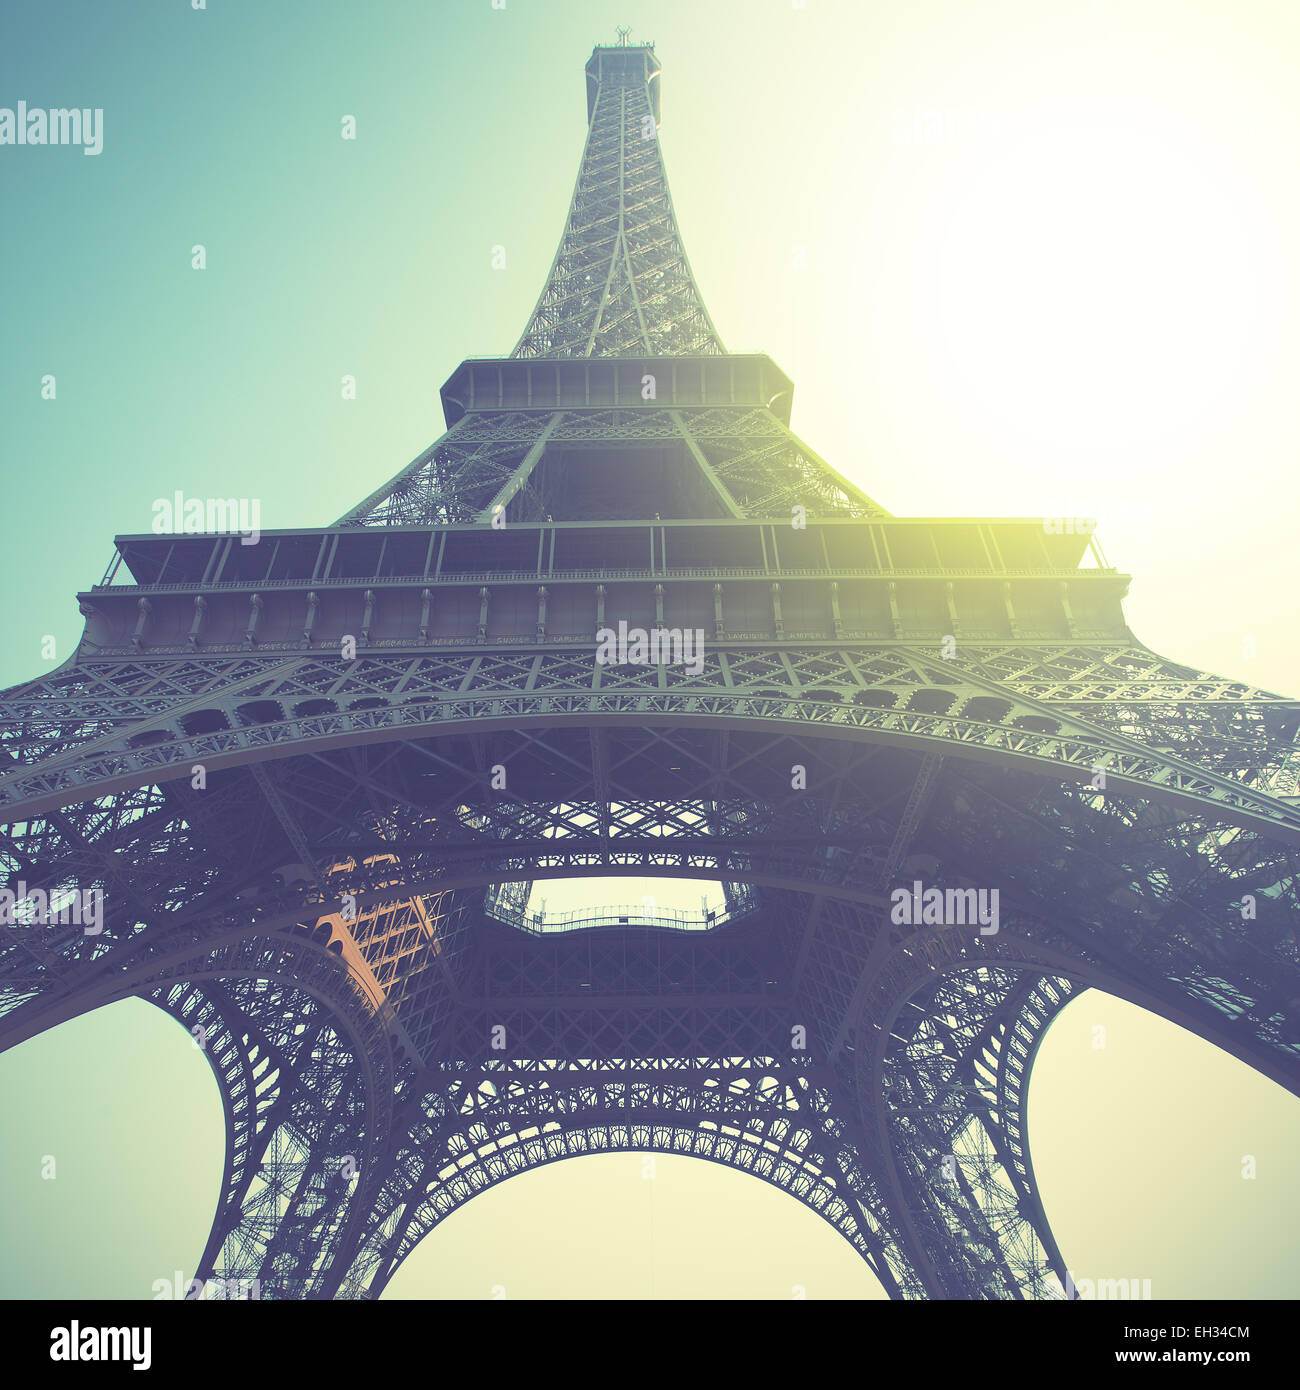 Eiffel Tower in Paris, France. Retro style filtred image Stock Photo - Alamy